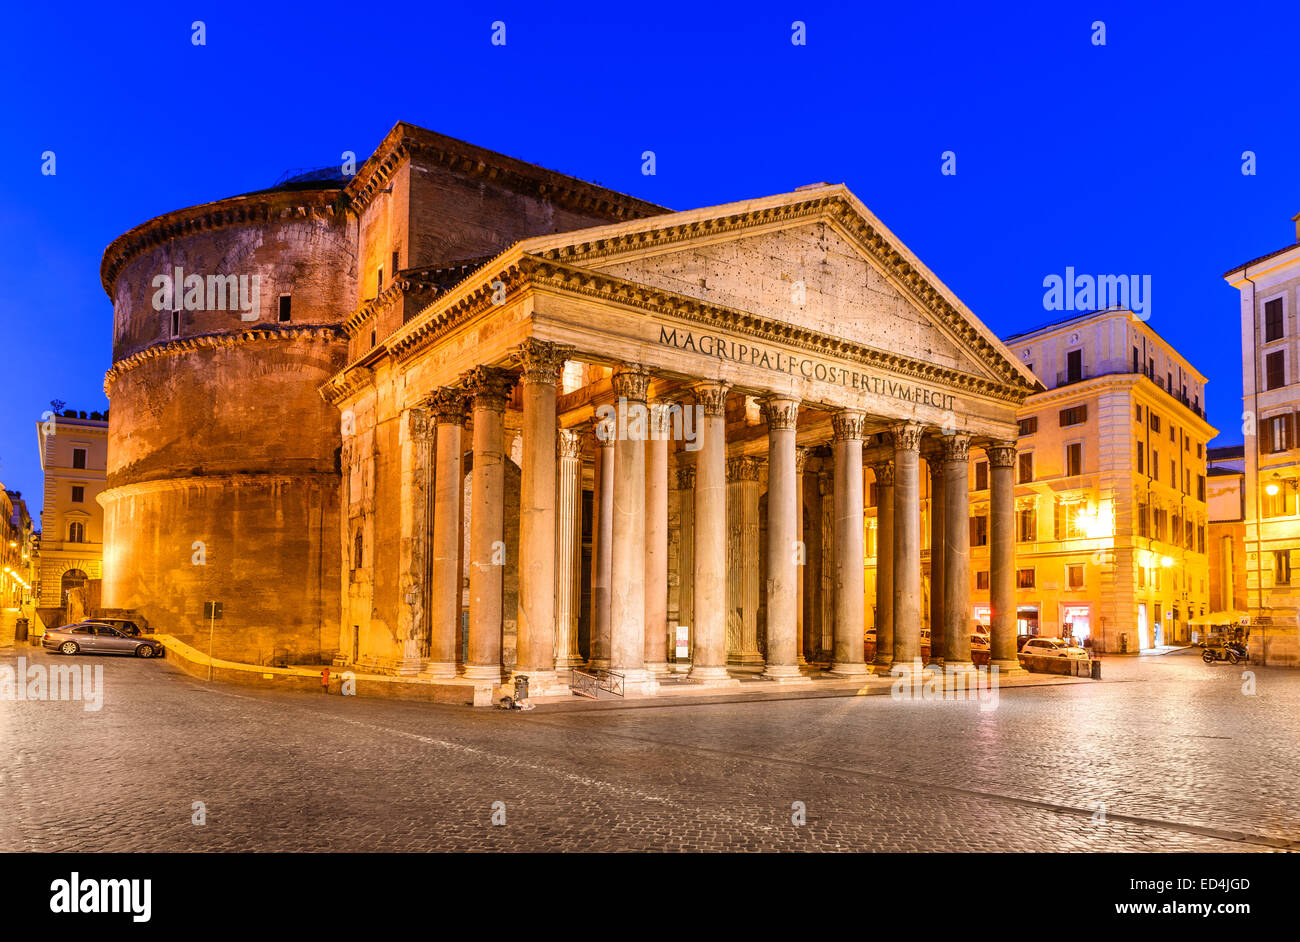 Night image of Pantheon, ancient architecture of Rome, Italy, dating from Roman Empire civilization Stock Photo